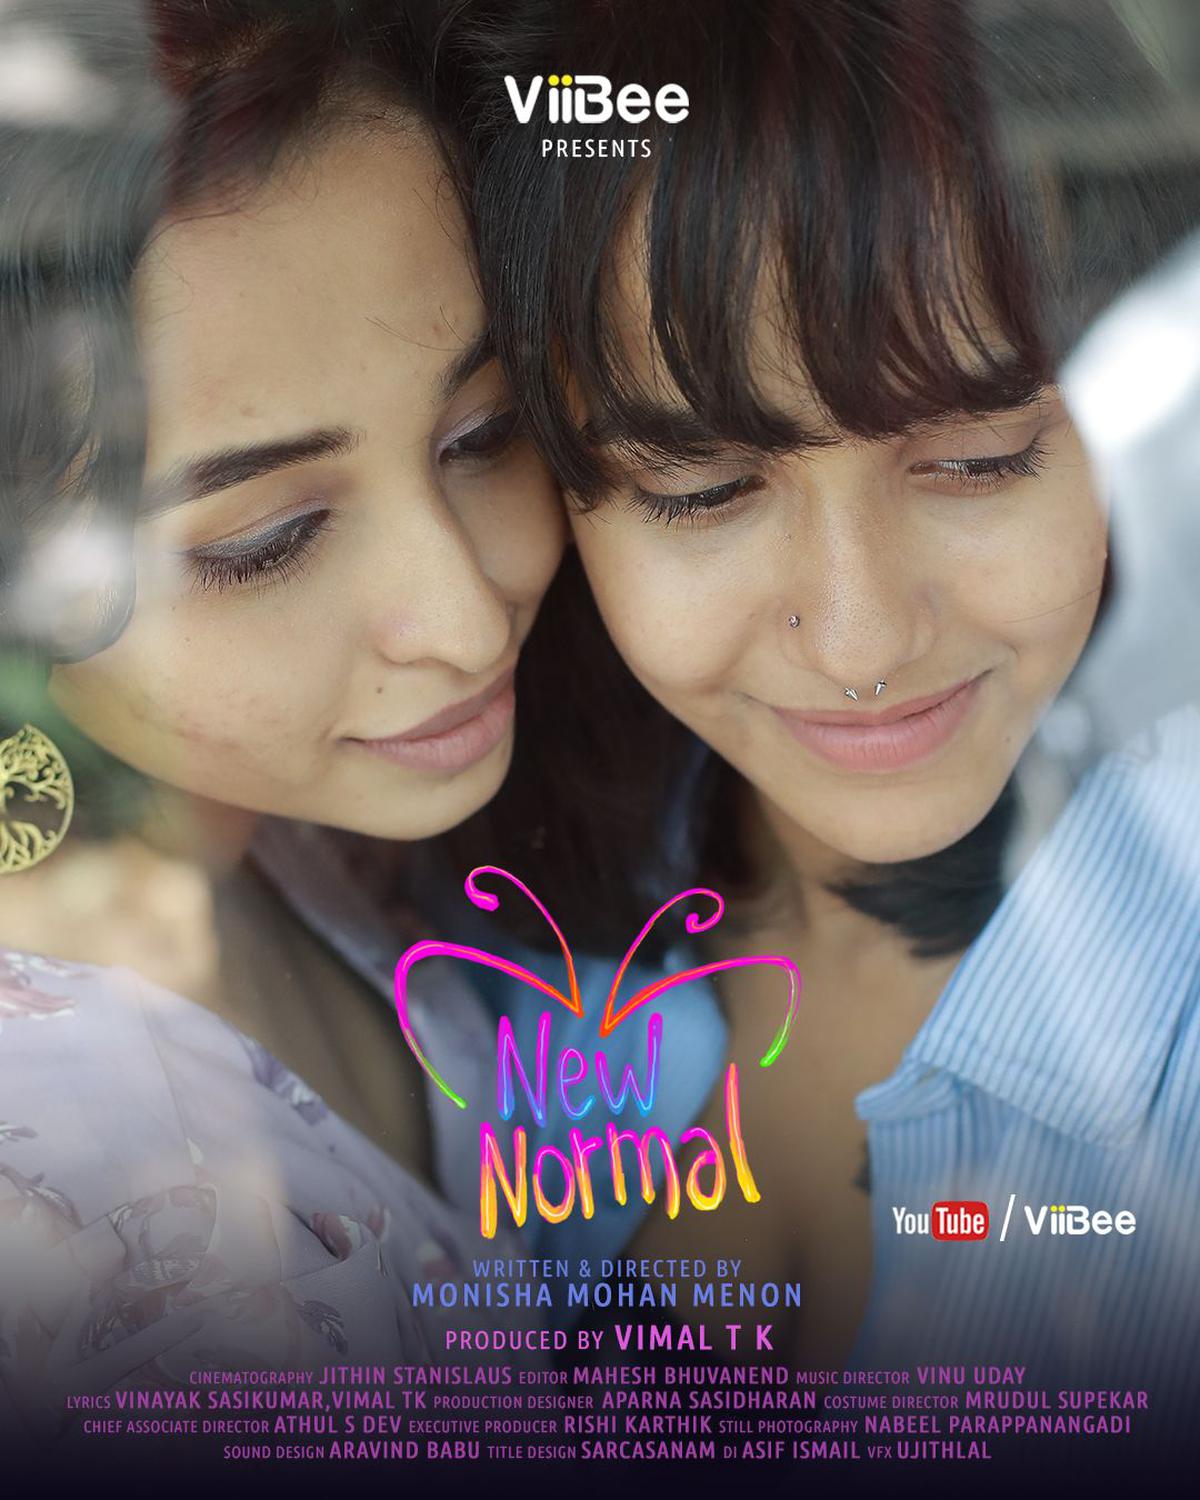 Malayalam short film 'New Normal' attempts to normalise the conversation  around homosexuality - The Hindu